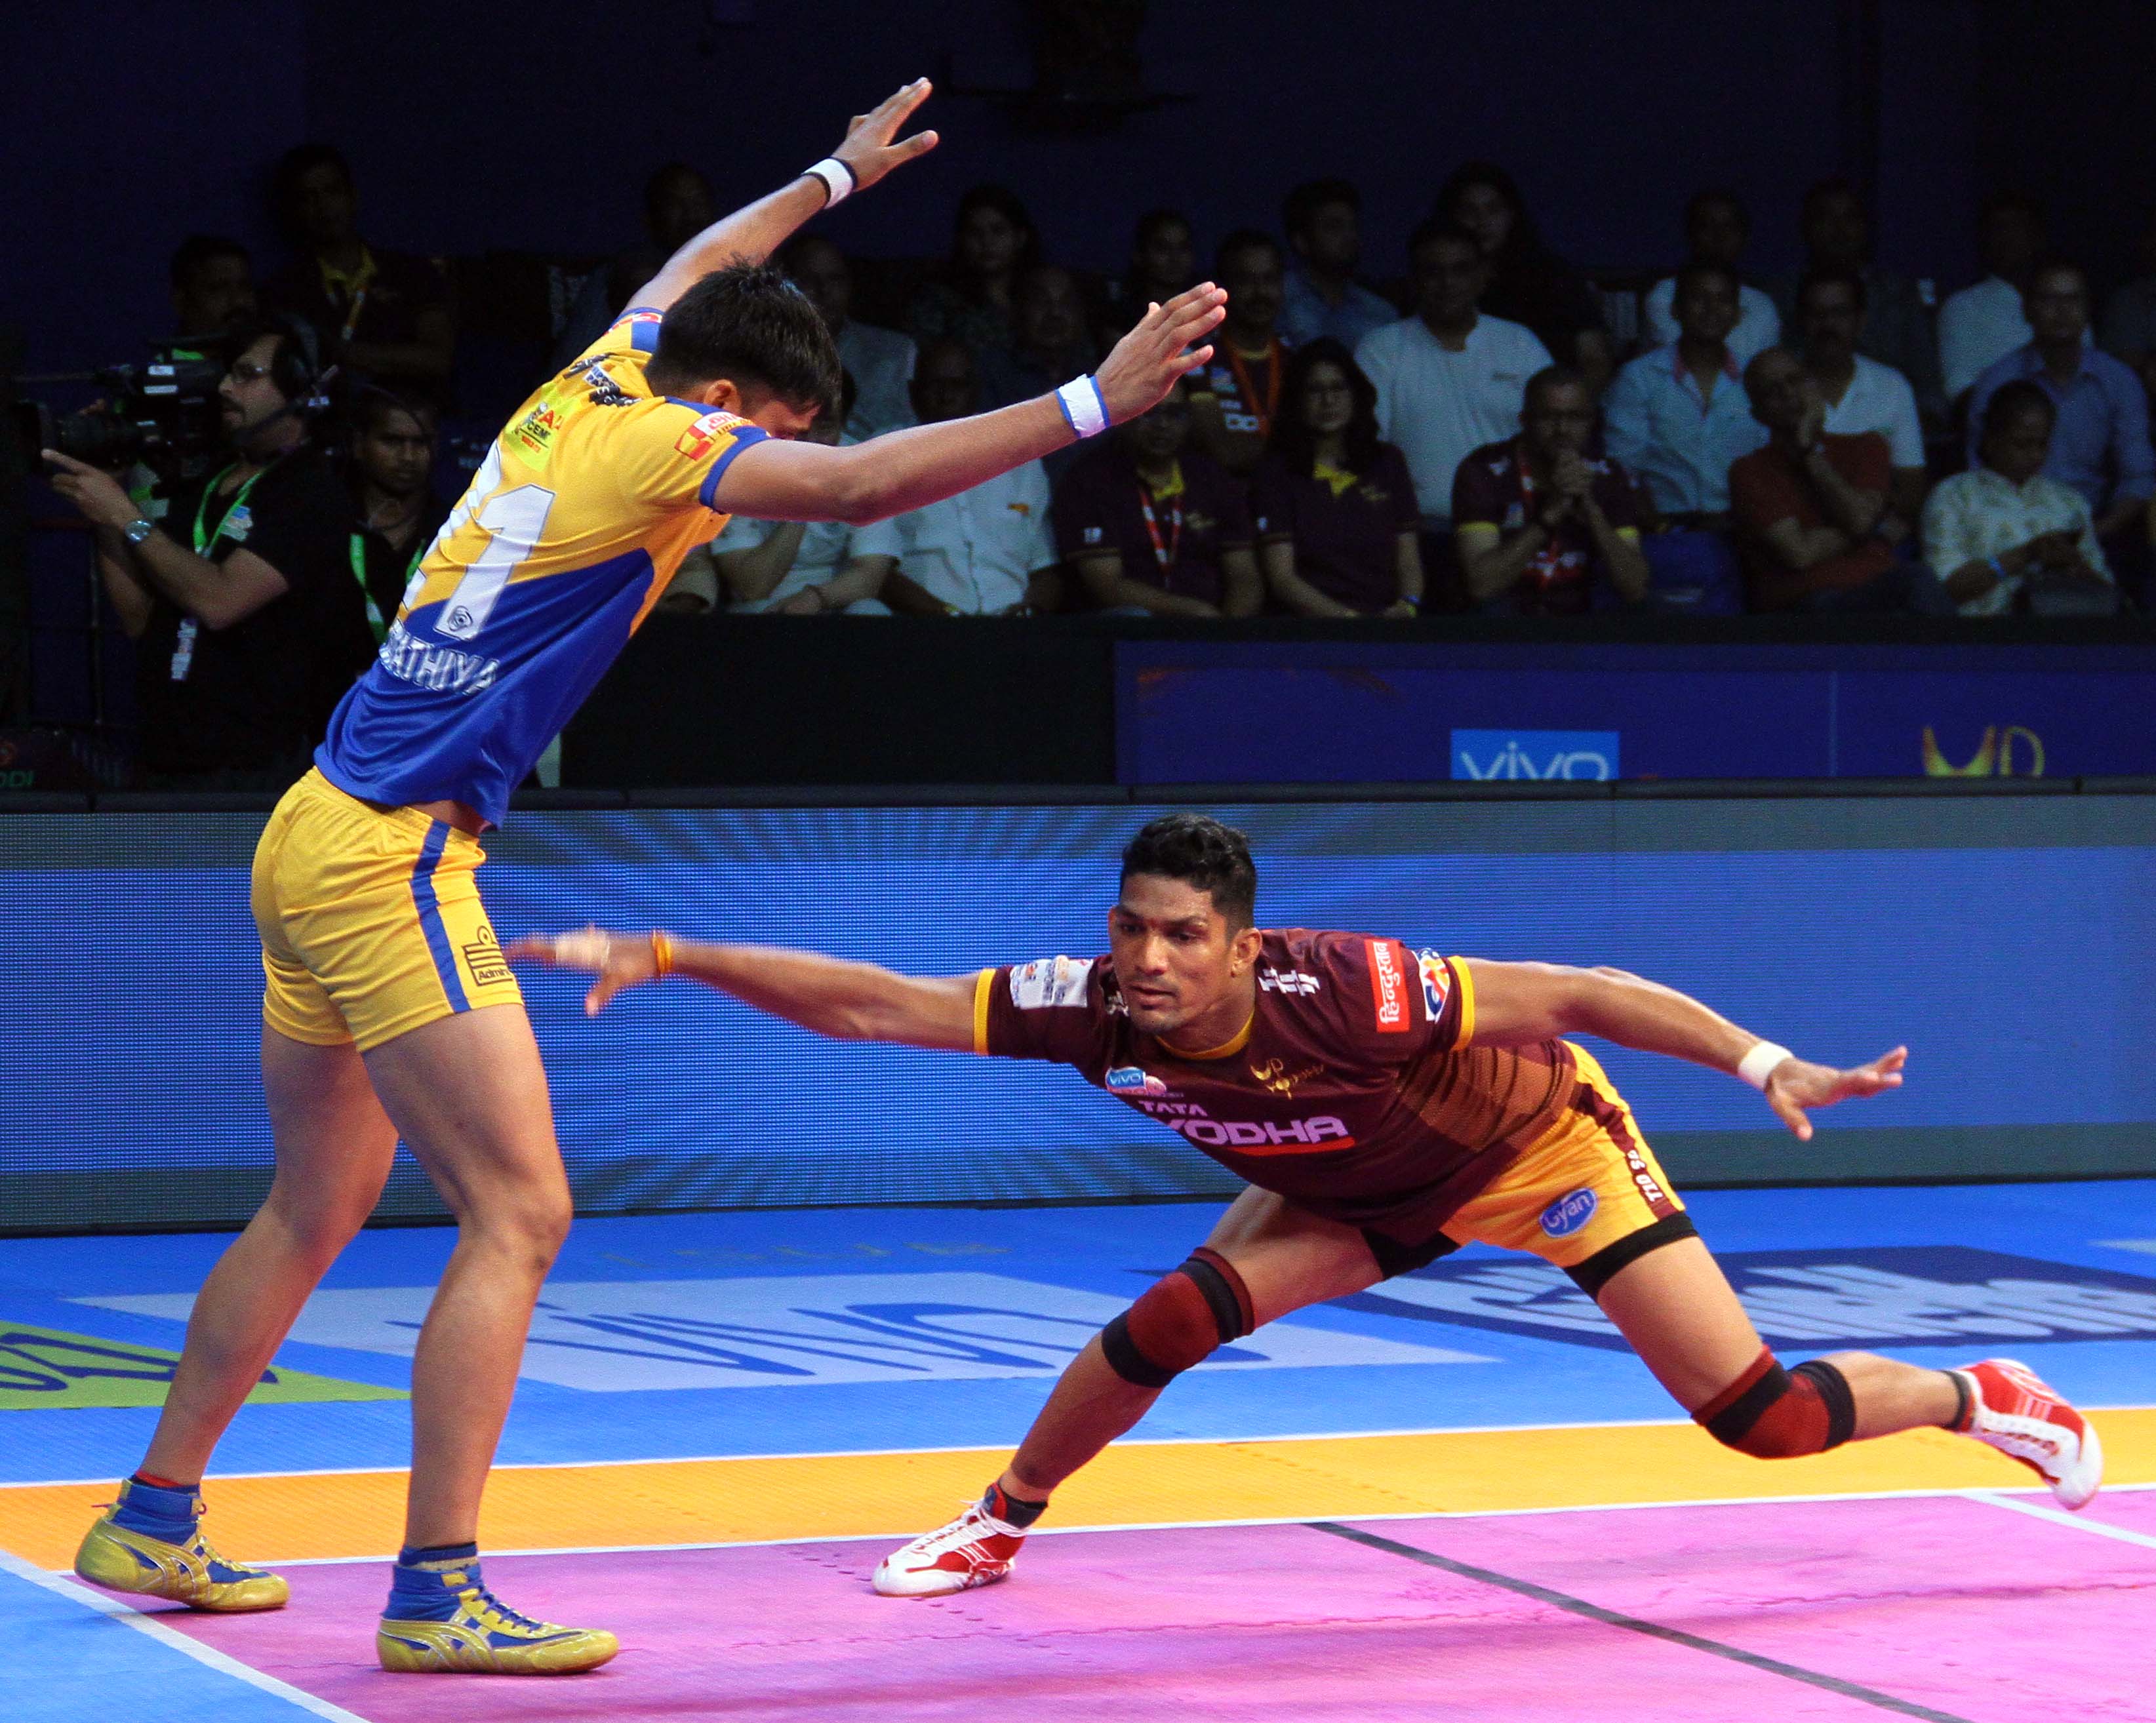 PKL 2017 |  UP Yodha and Tamil Thalaivas play out a pulsating tie